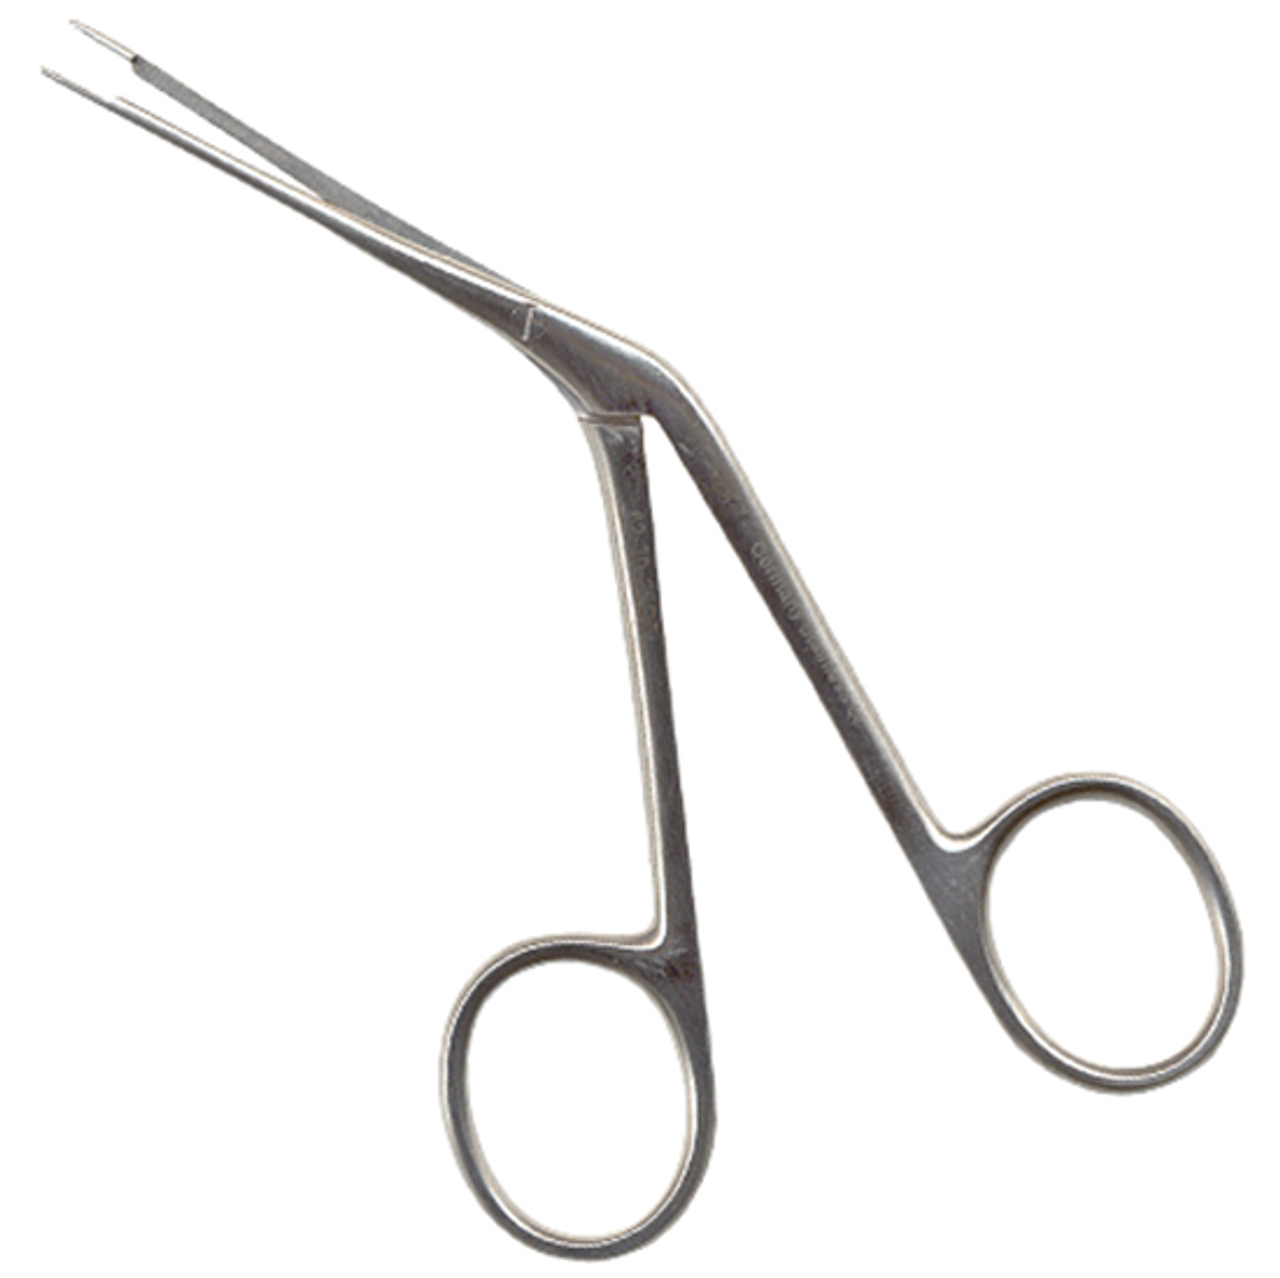 https://cdn11.bigcommerce.com/s-woky5/images/stencil/1280x1280/products/603/1118/extra_delicate_hartman_0003306_noyes-hartmann-ear-forceps-extra-delicate_550__21144.1547234755.png?c=2